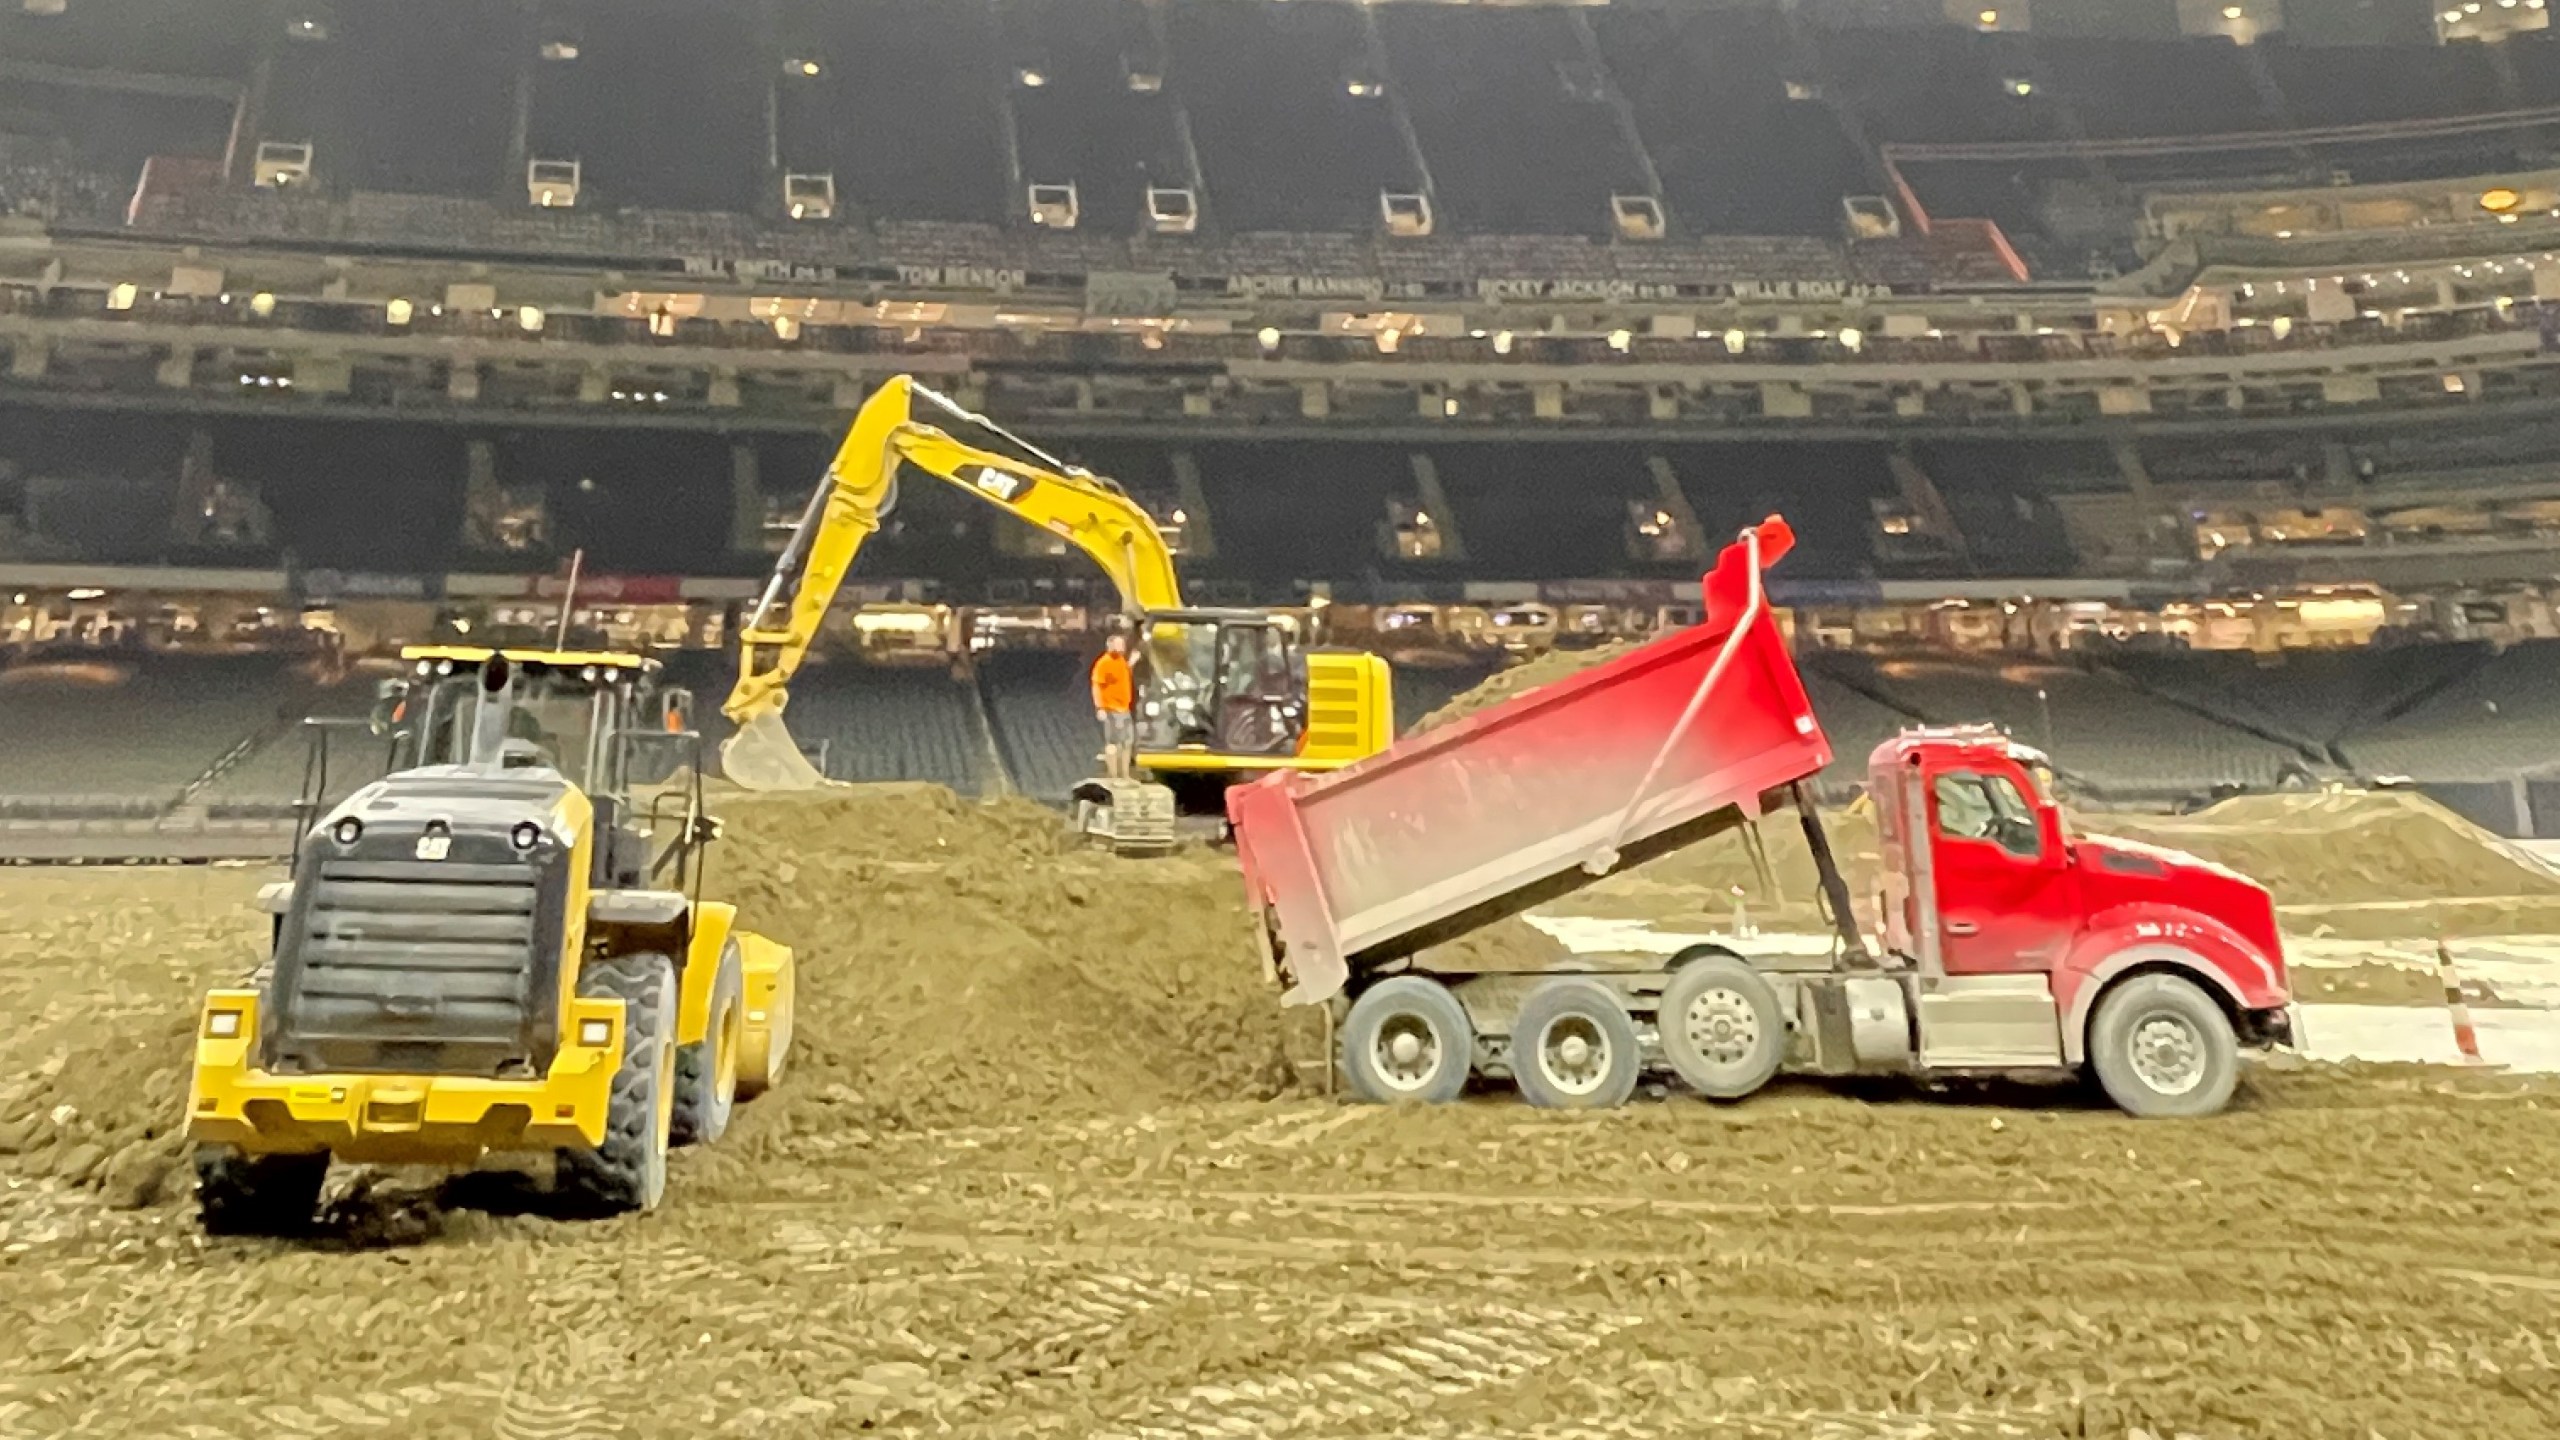 https://digital-stage.wgno.com/news/local/monster-jam-prepares-for-upcoming-weekend-delivering-3-5-million-pounds-of-dirt-to-caesars-superdome/